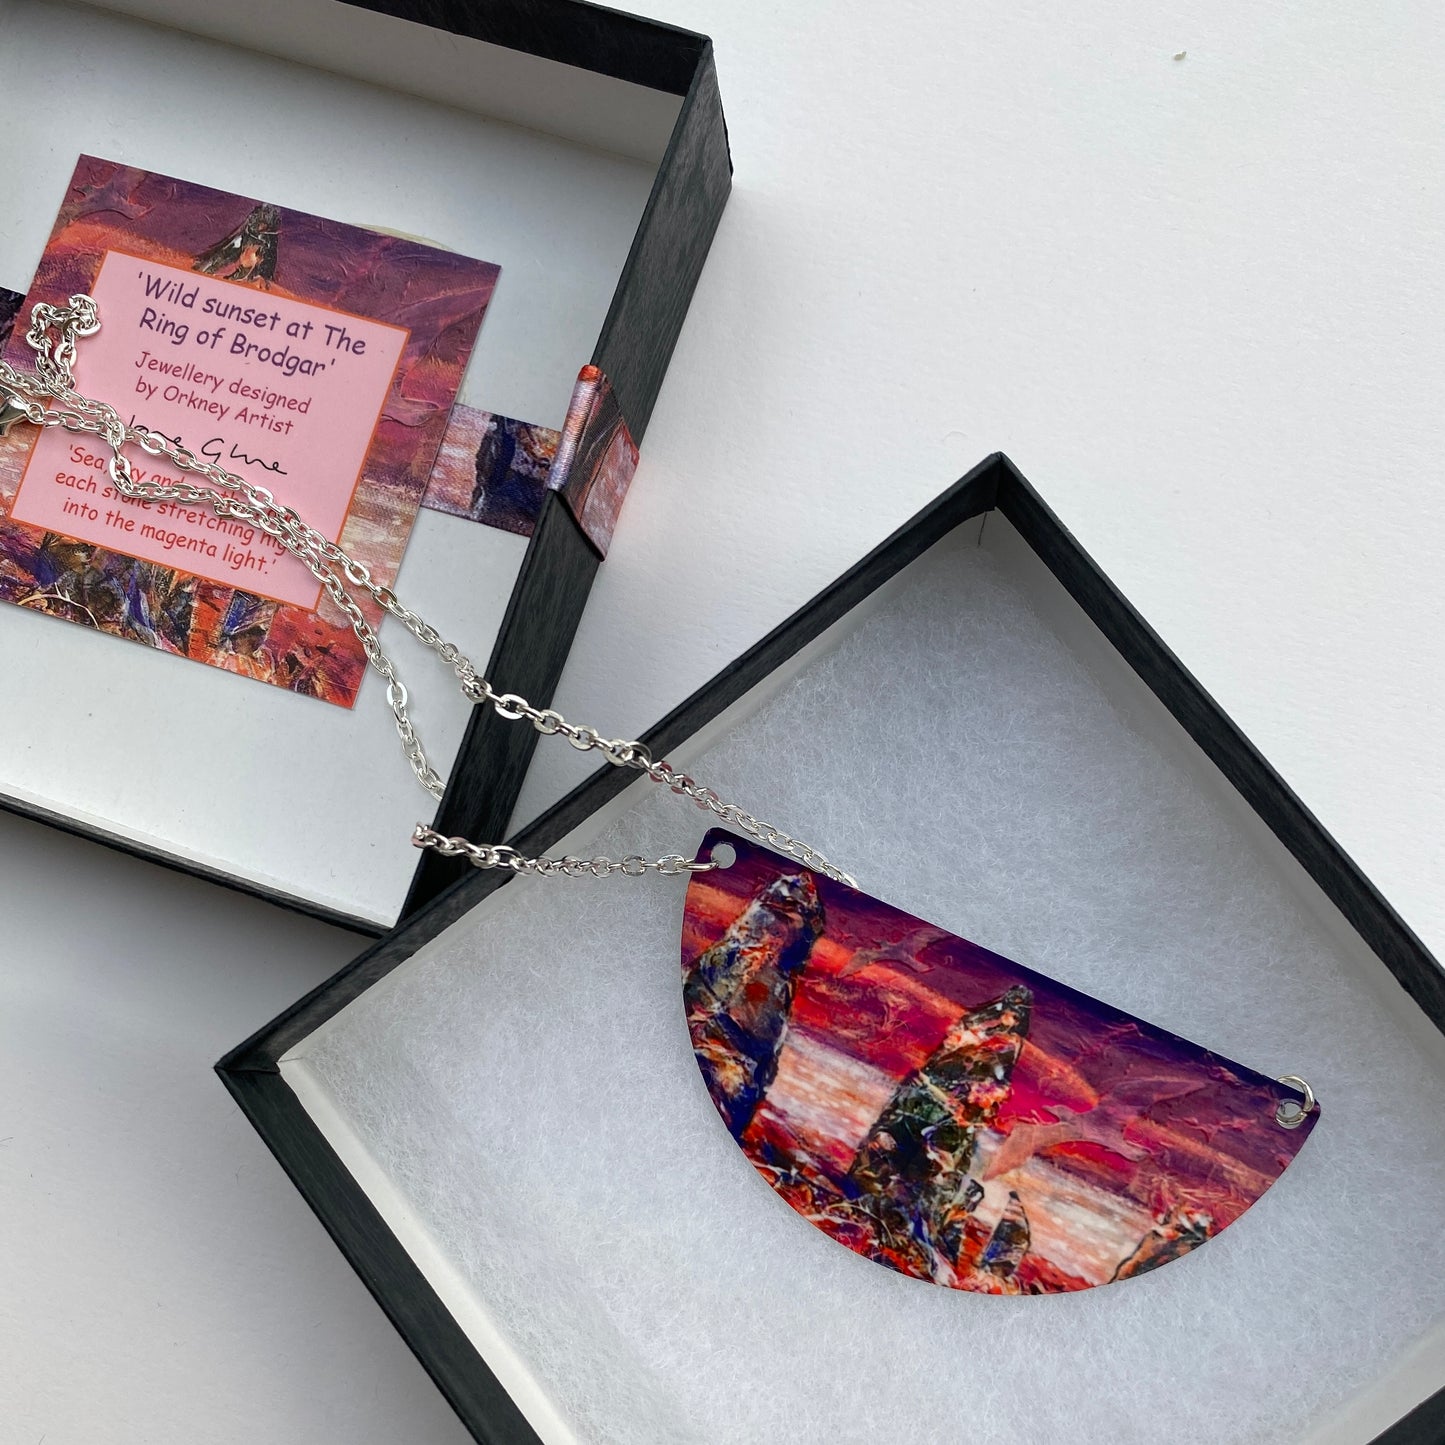 A pendant necklace design, Wild sunset at THe Ring of Brodgar by Orkney artist Jane Glue, Scotland